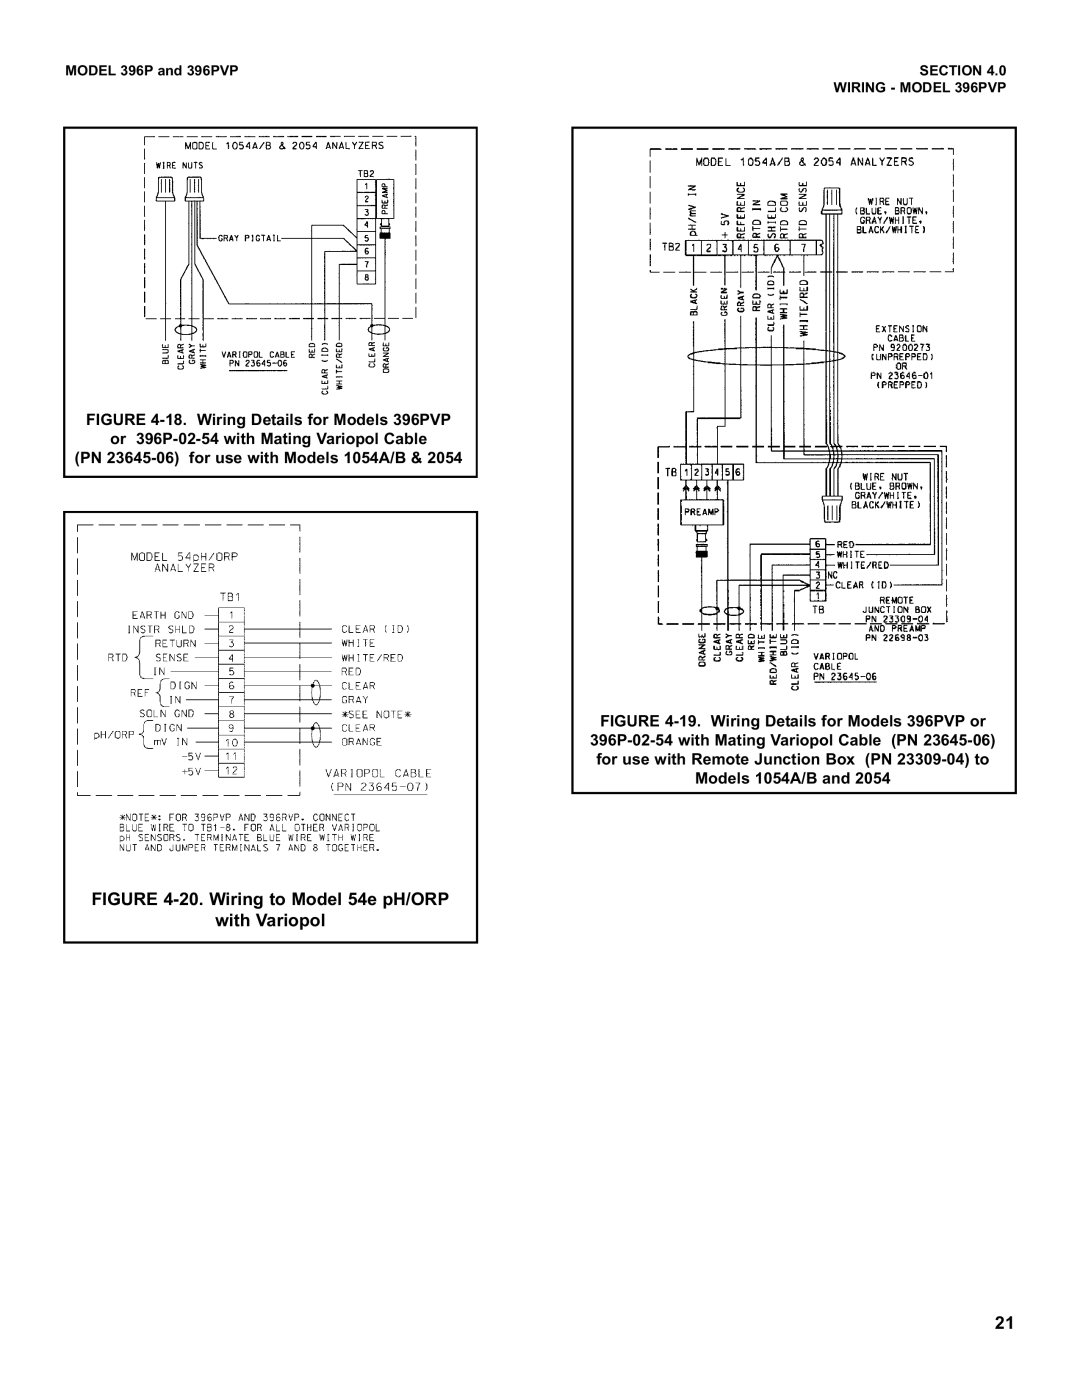 Emerson Process Management 20.Wiring to Model 54e pH/ORP, with Variopol, 18.Wiring Details for Models 396PVP, Section 